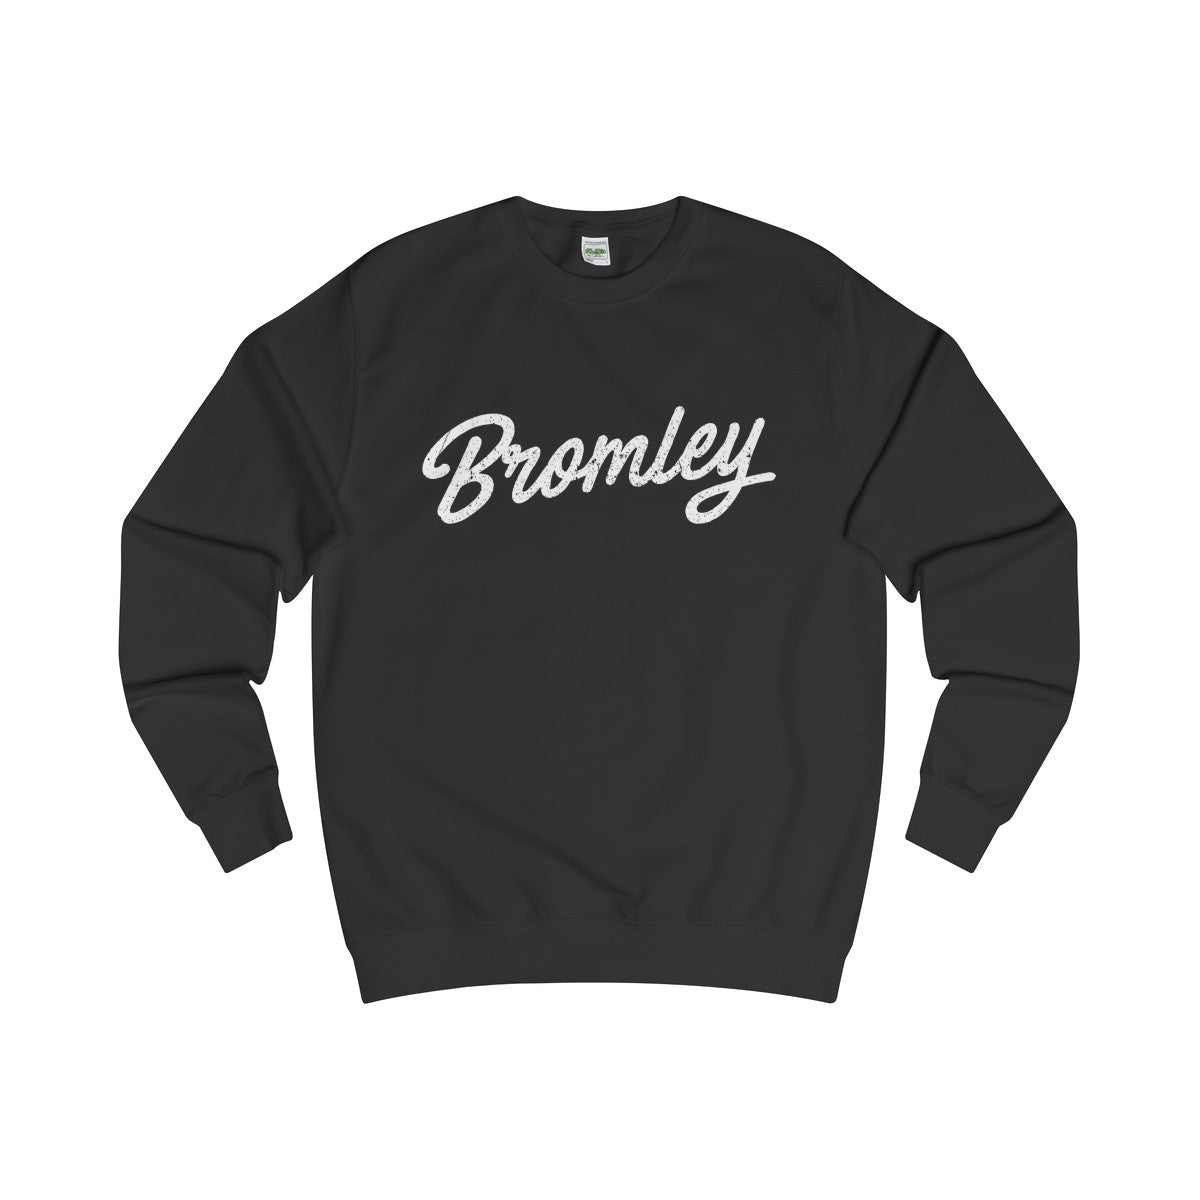 Bromley Scripted Sweater